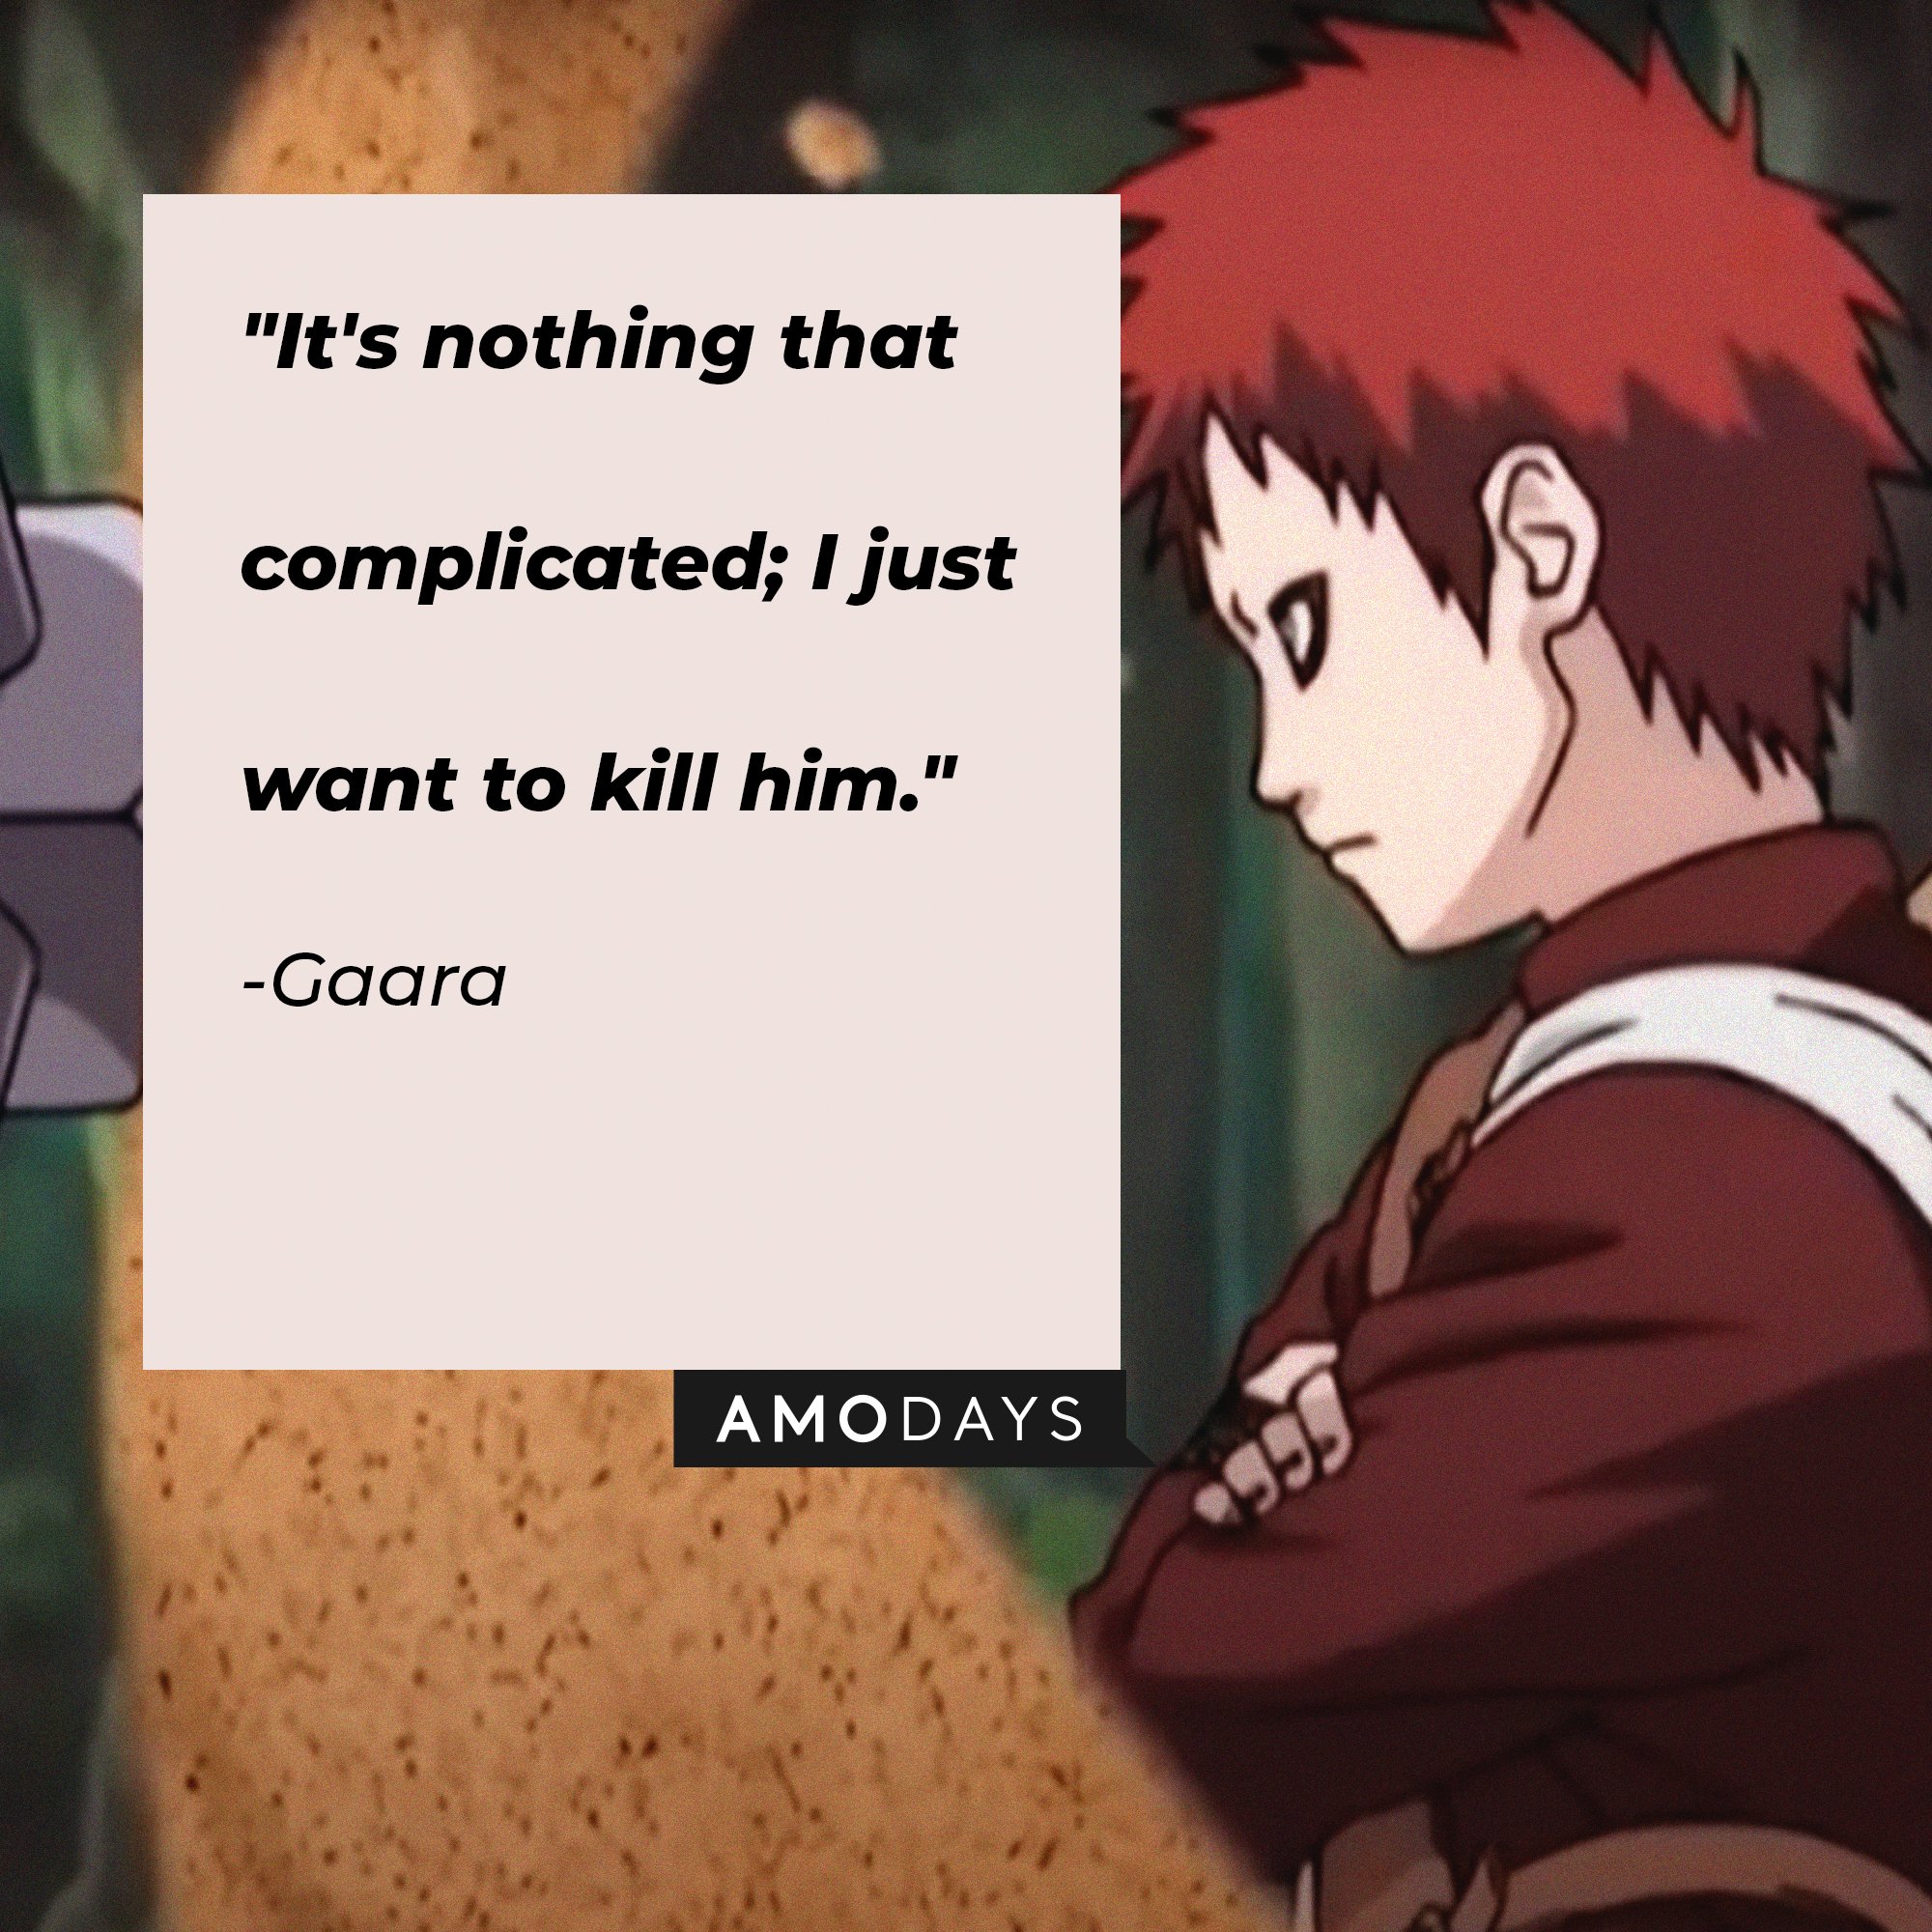 Gaara’s quote: "It's nothing that complicated; I just want to kill him." | Image: AmoDays